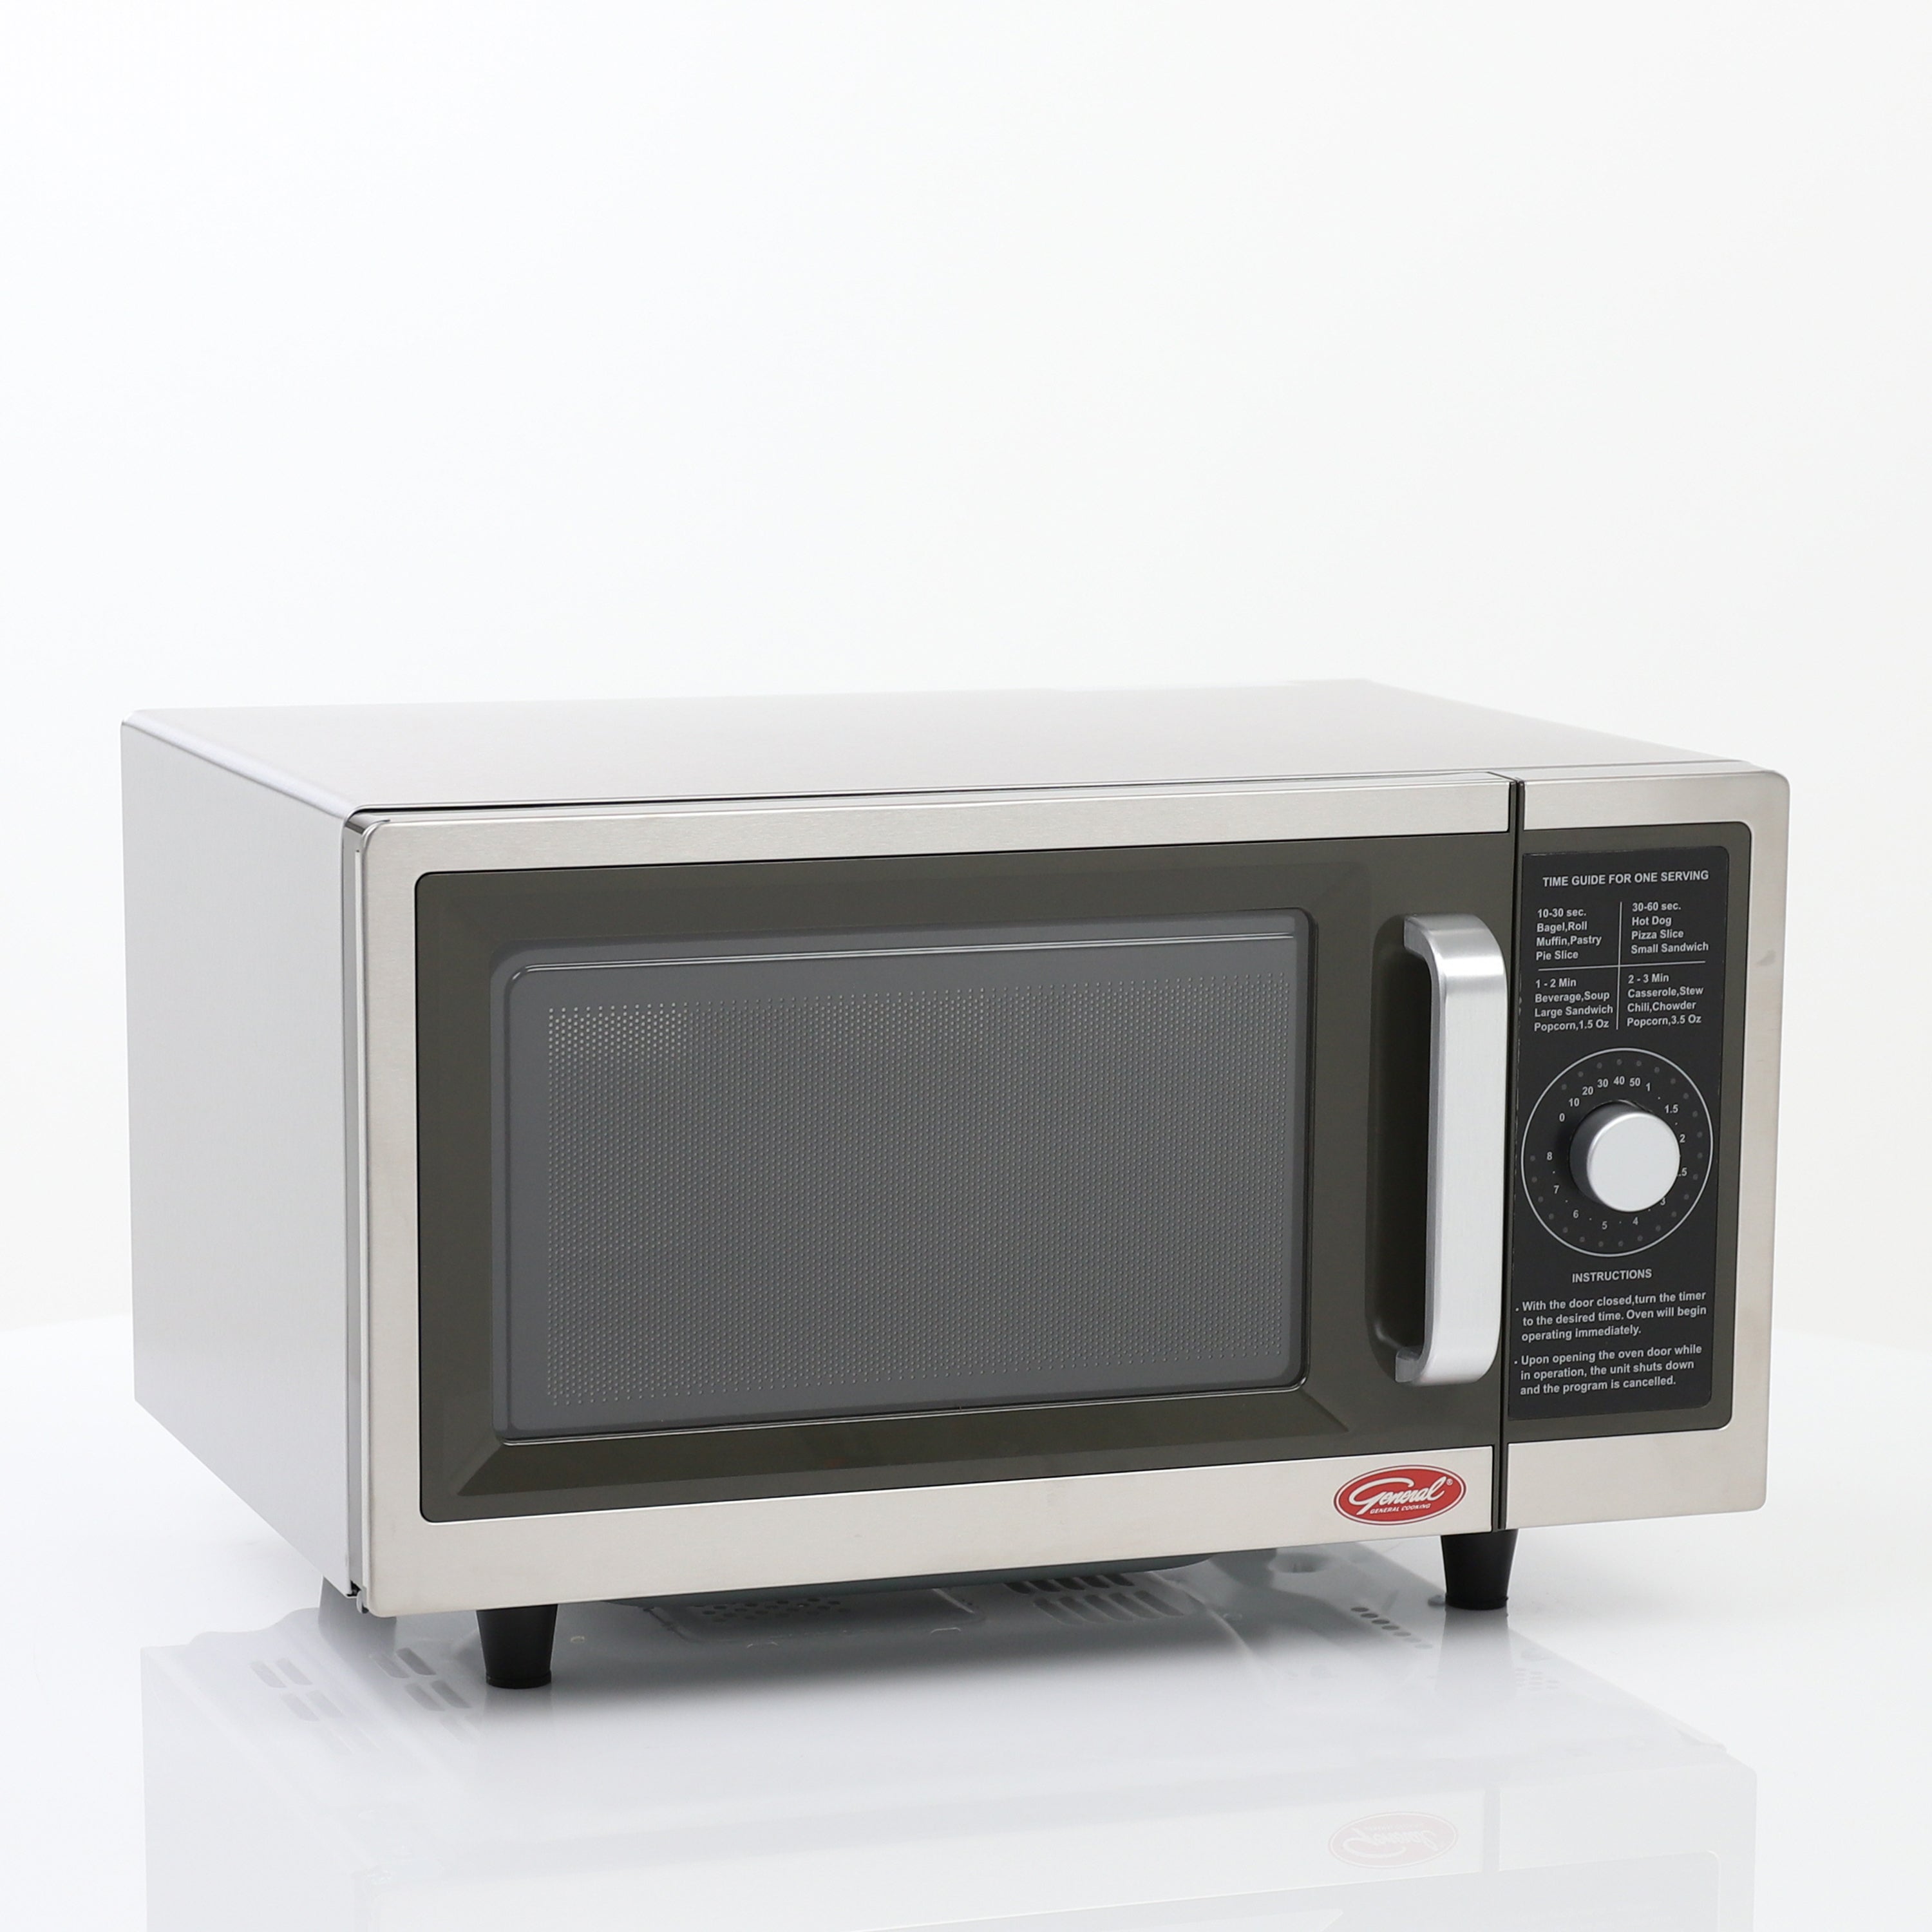 General - GEW1000D, General Foodservice Commercial Microwave with Dial Control, 1000 Watt, in Stainless Steel